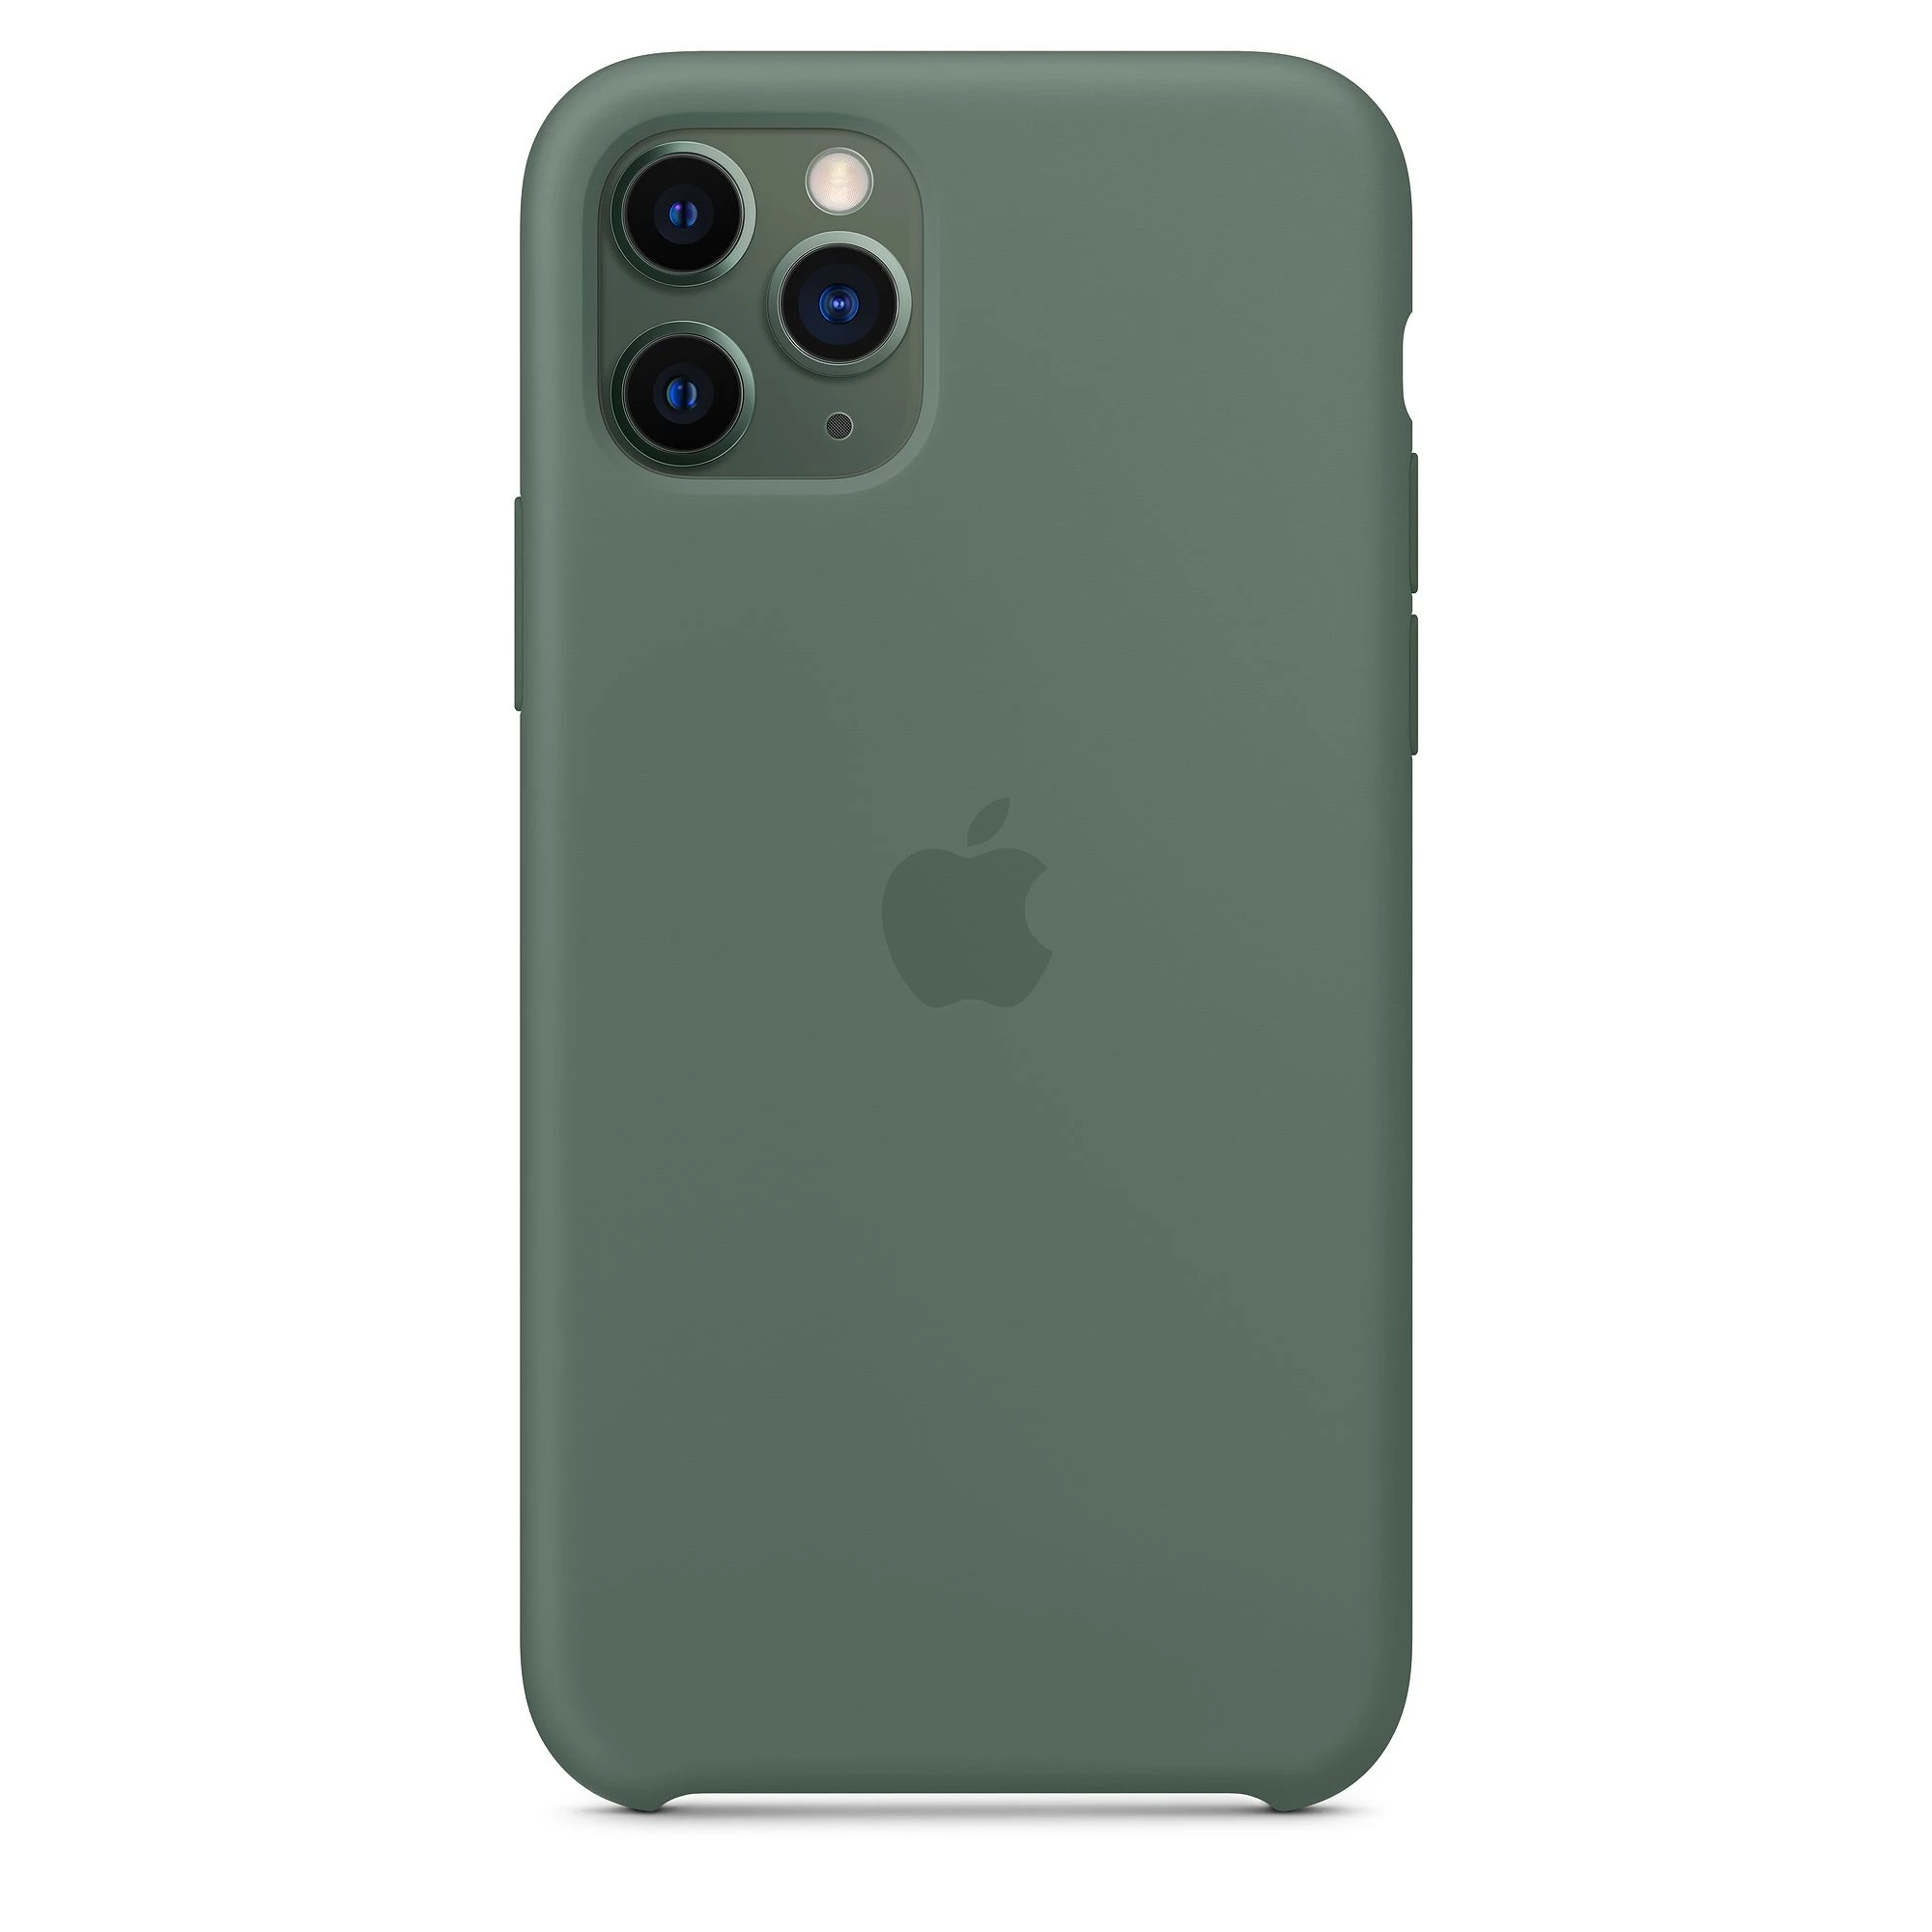 Apple iPhone 11 Pro Silicone Case LUX COPY - Pine Green (MWYP2)